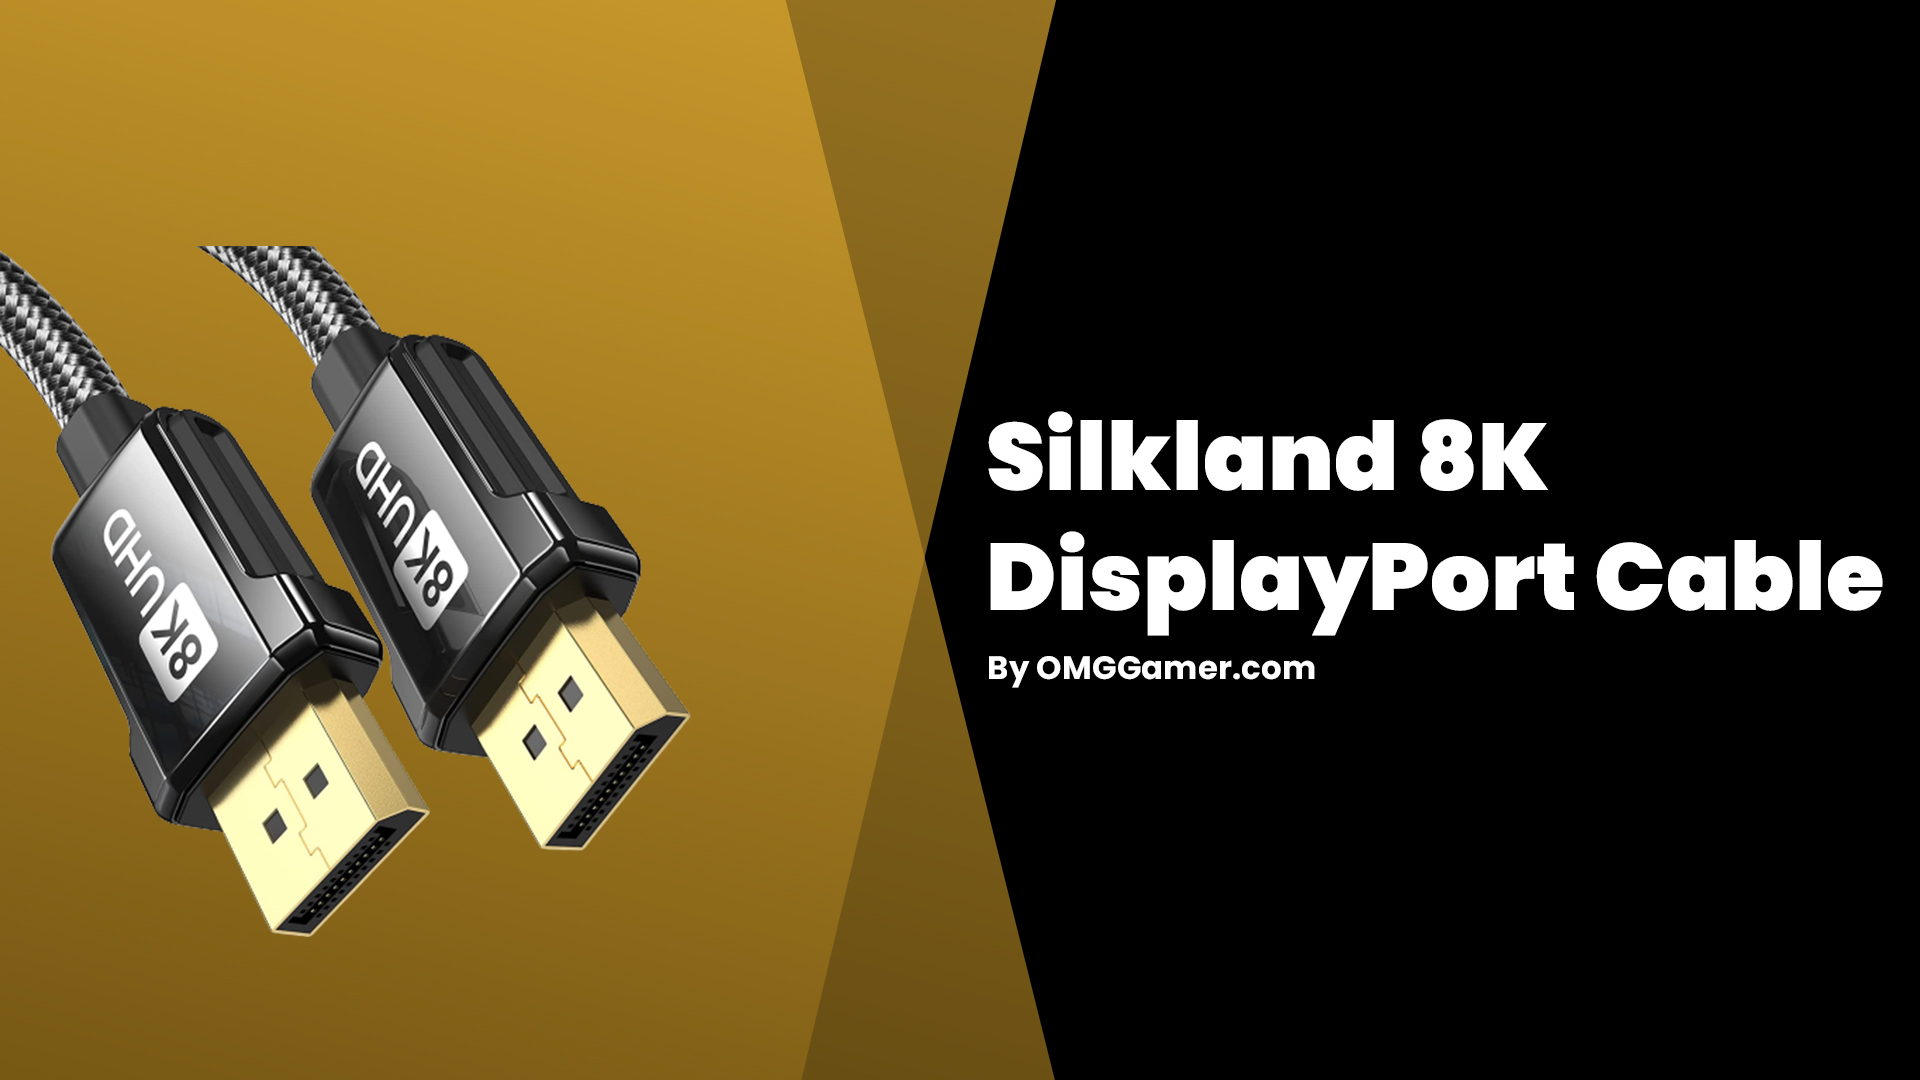 Silkland 8K: DisplayPort Cable For Gaming